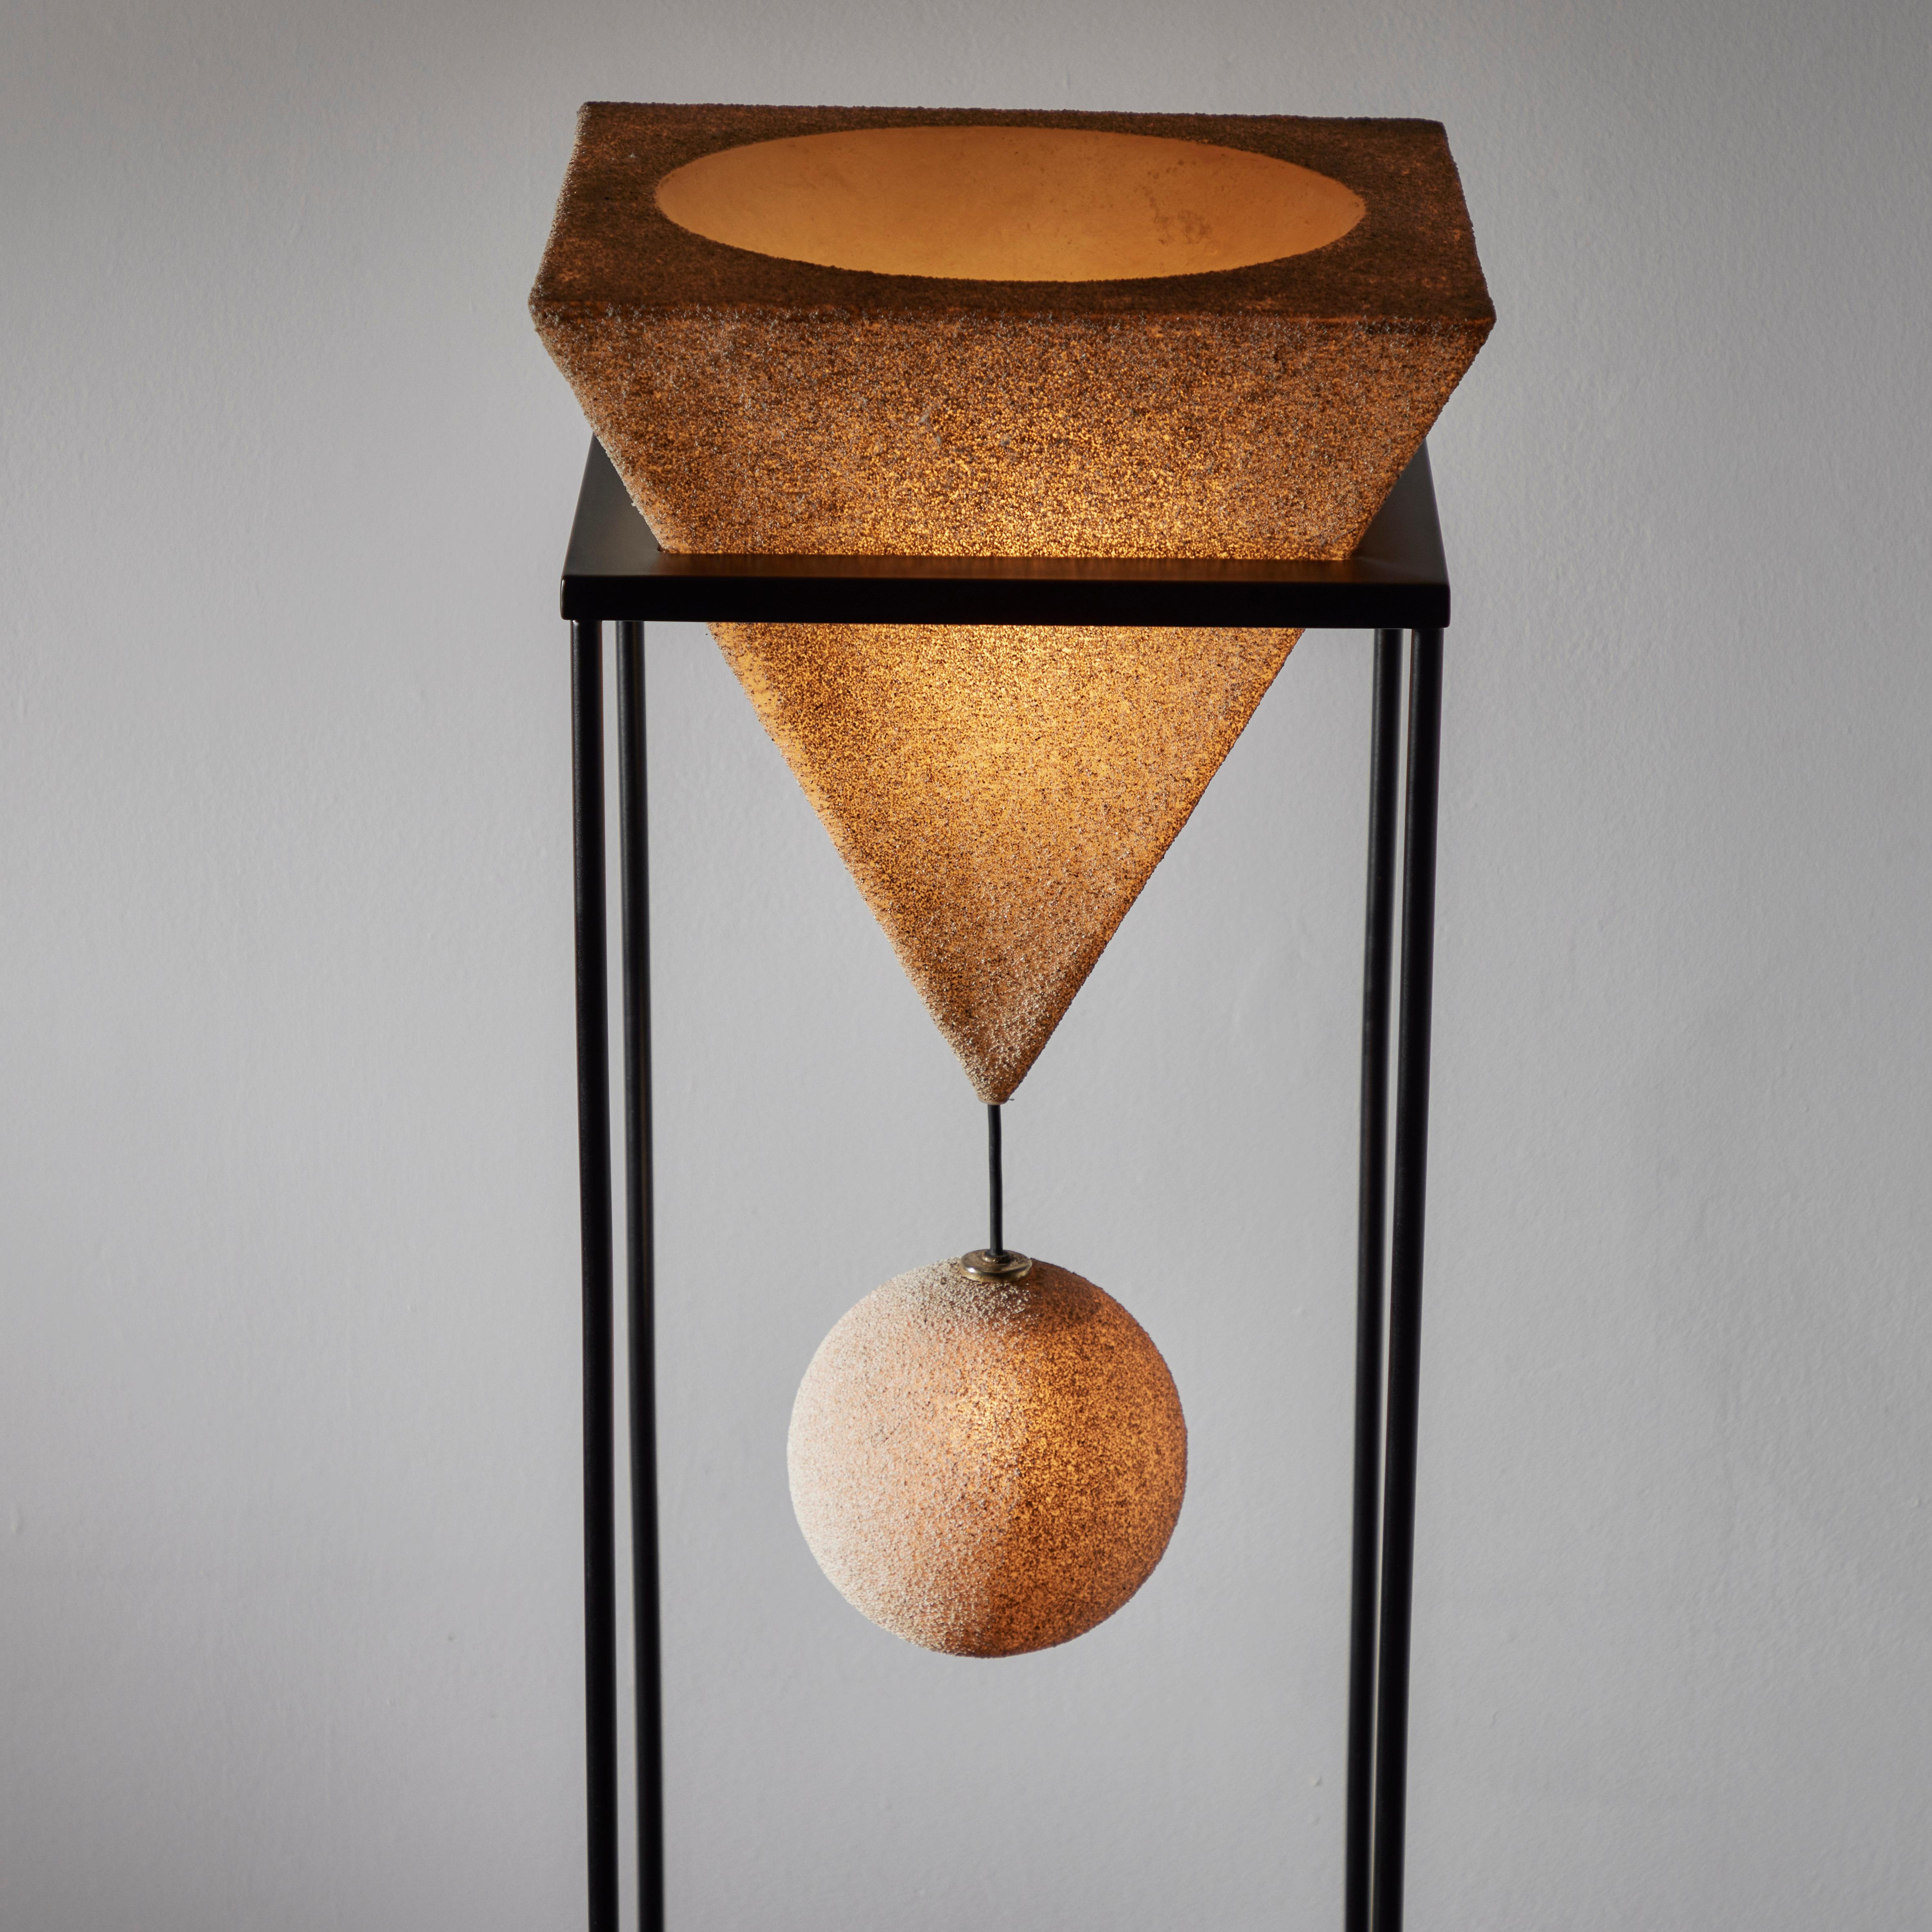 Late 20th Century Floor Lamp by Luciano Sartini for Singleton